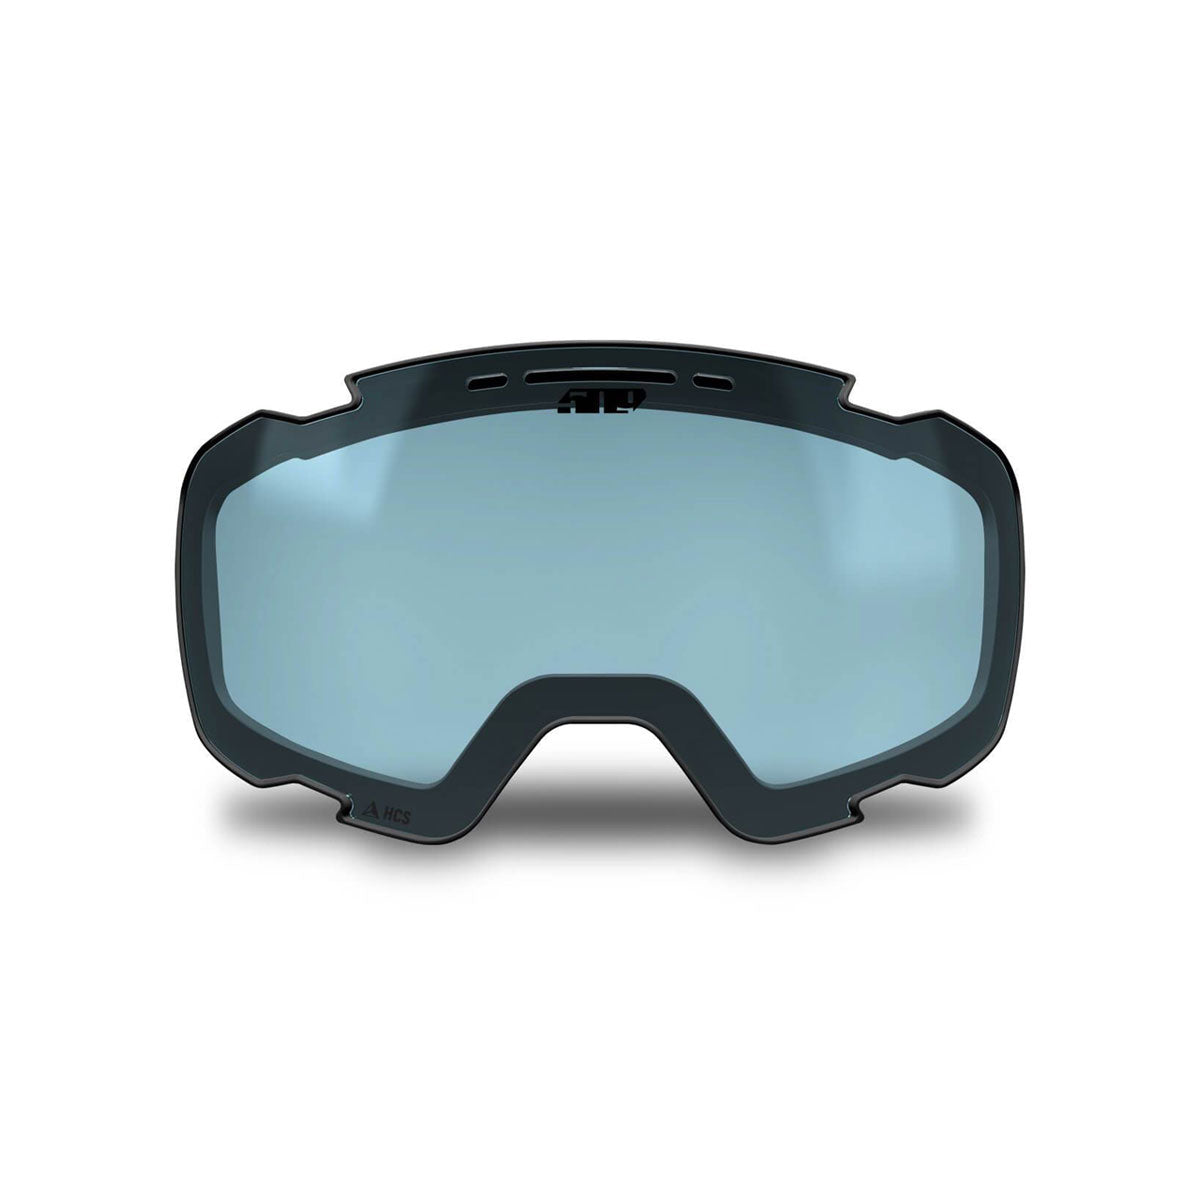 Aviator 2.0 Lens - Photochromatic Clear to Blue Tint